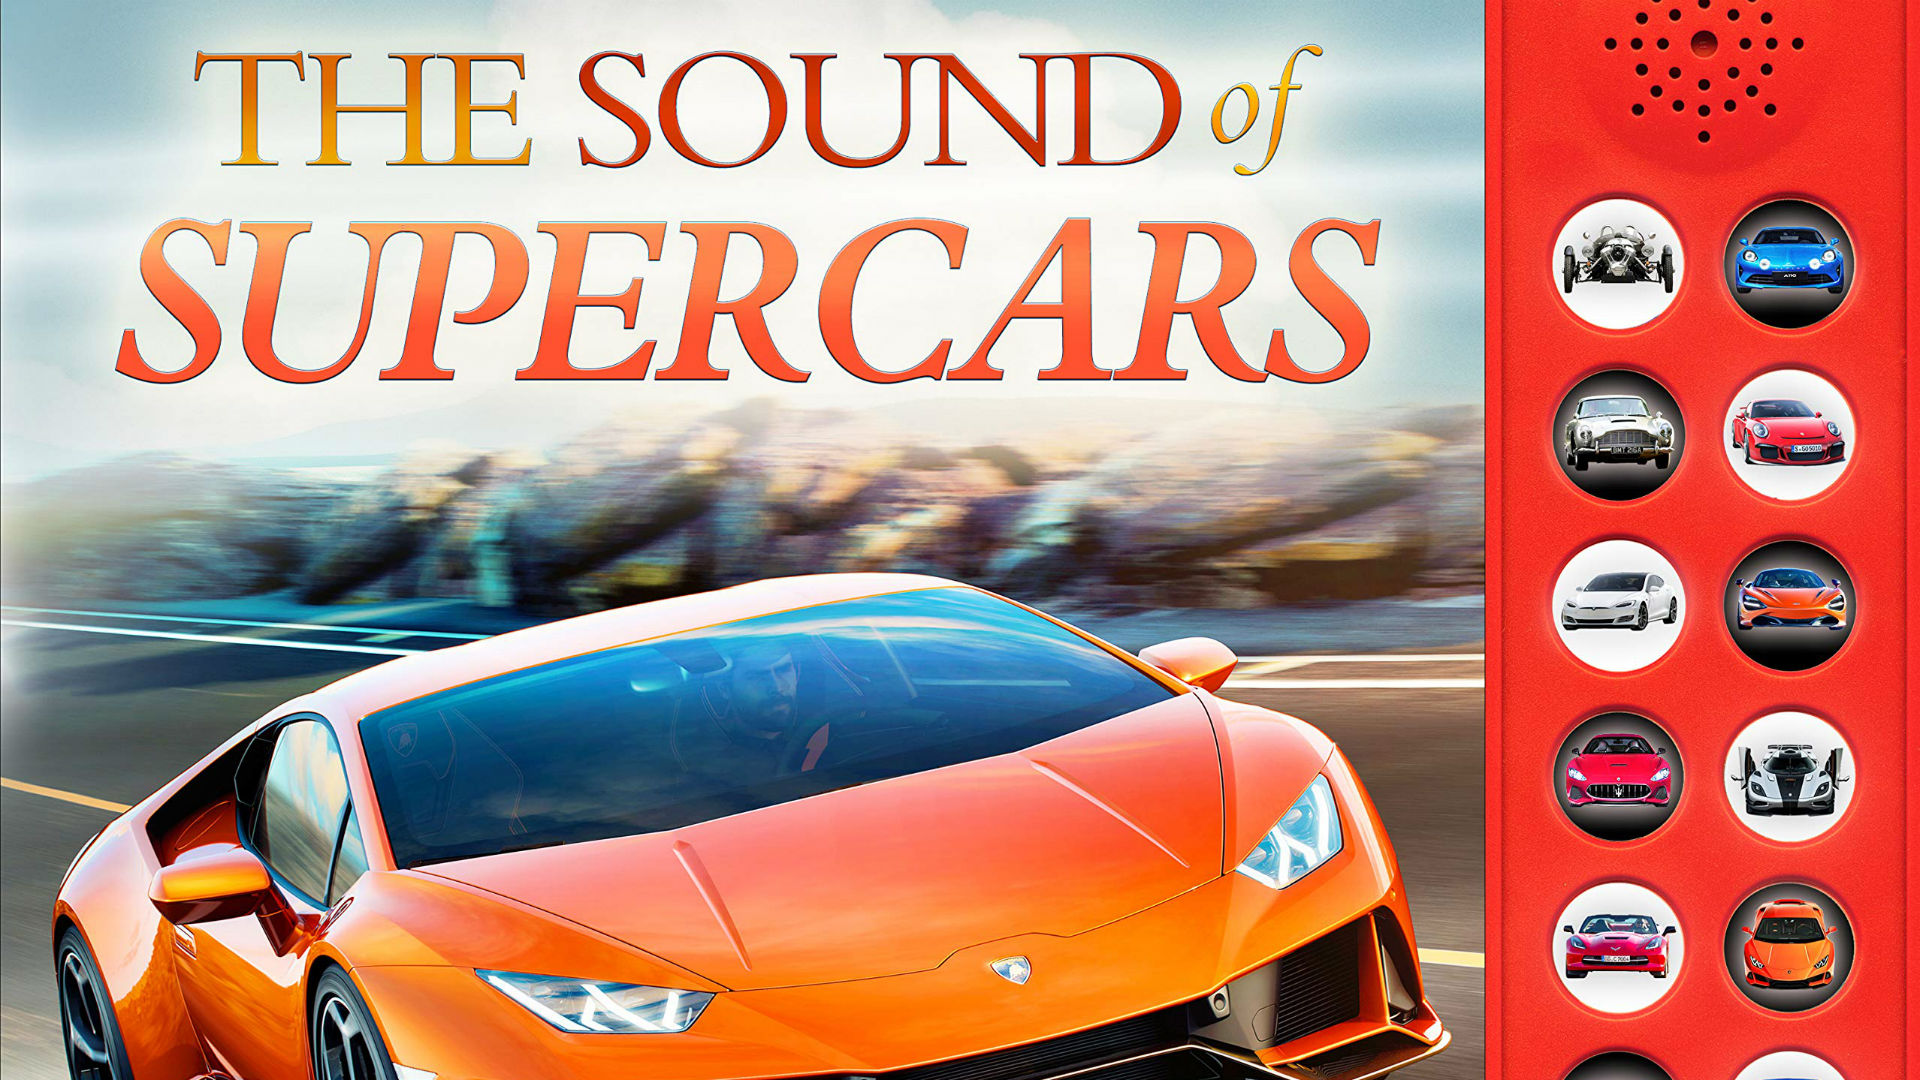 The Sound of Supercars